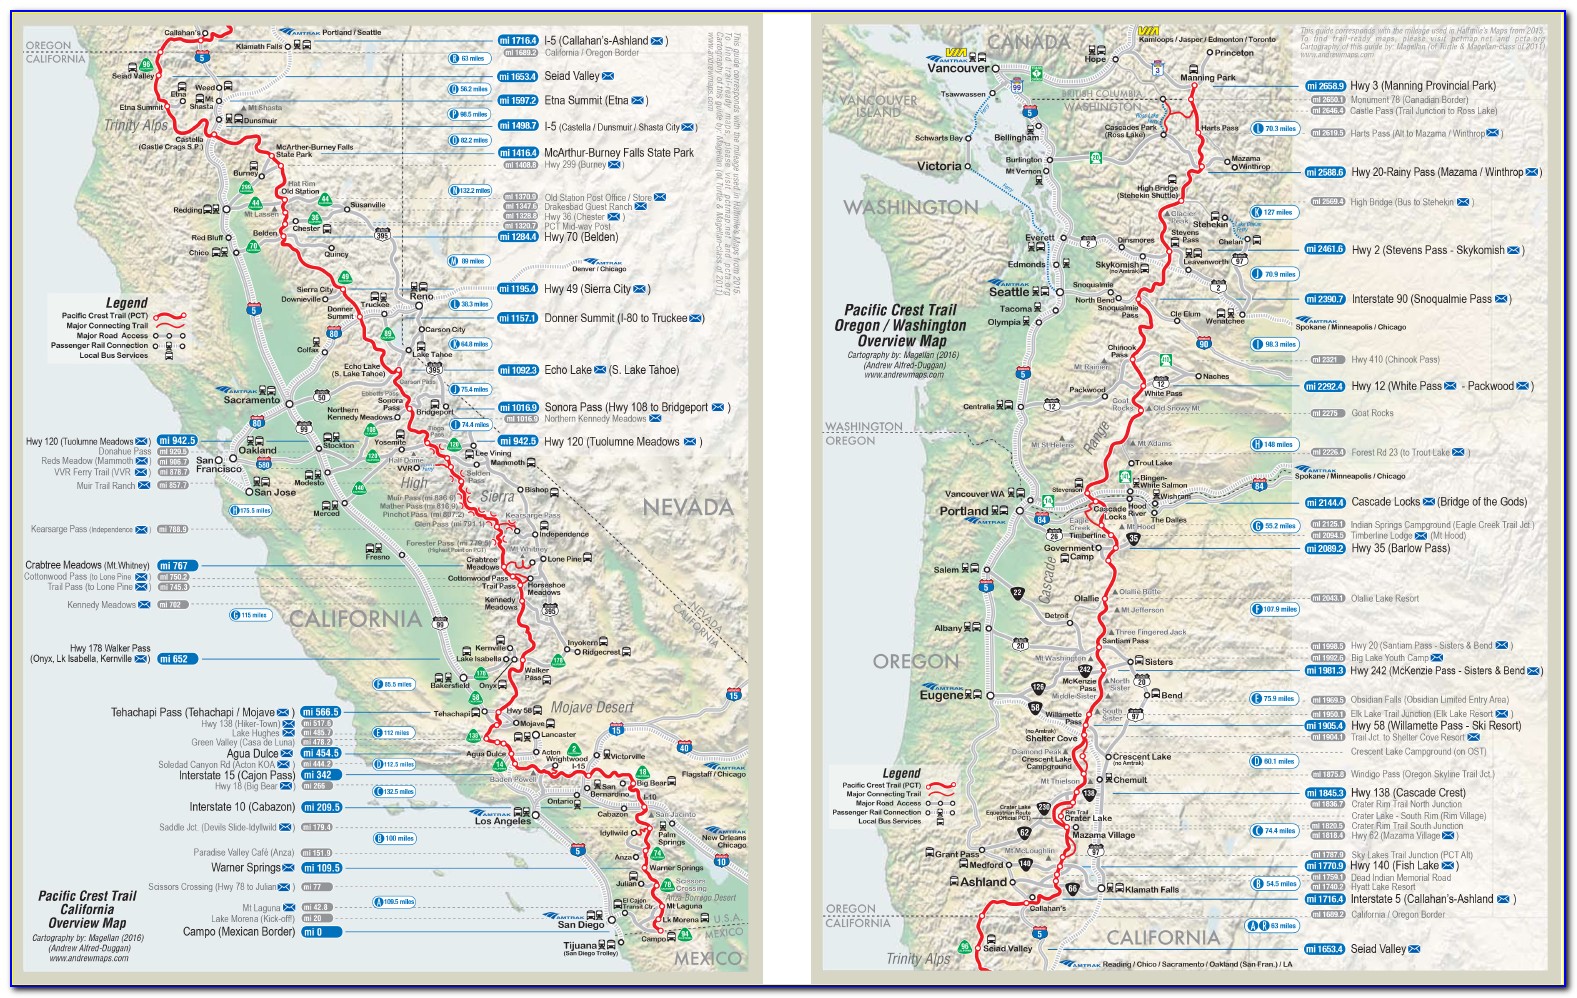 Pct California Overview 2016